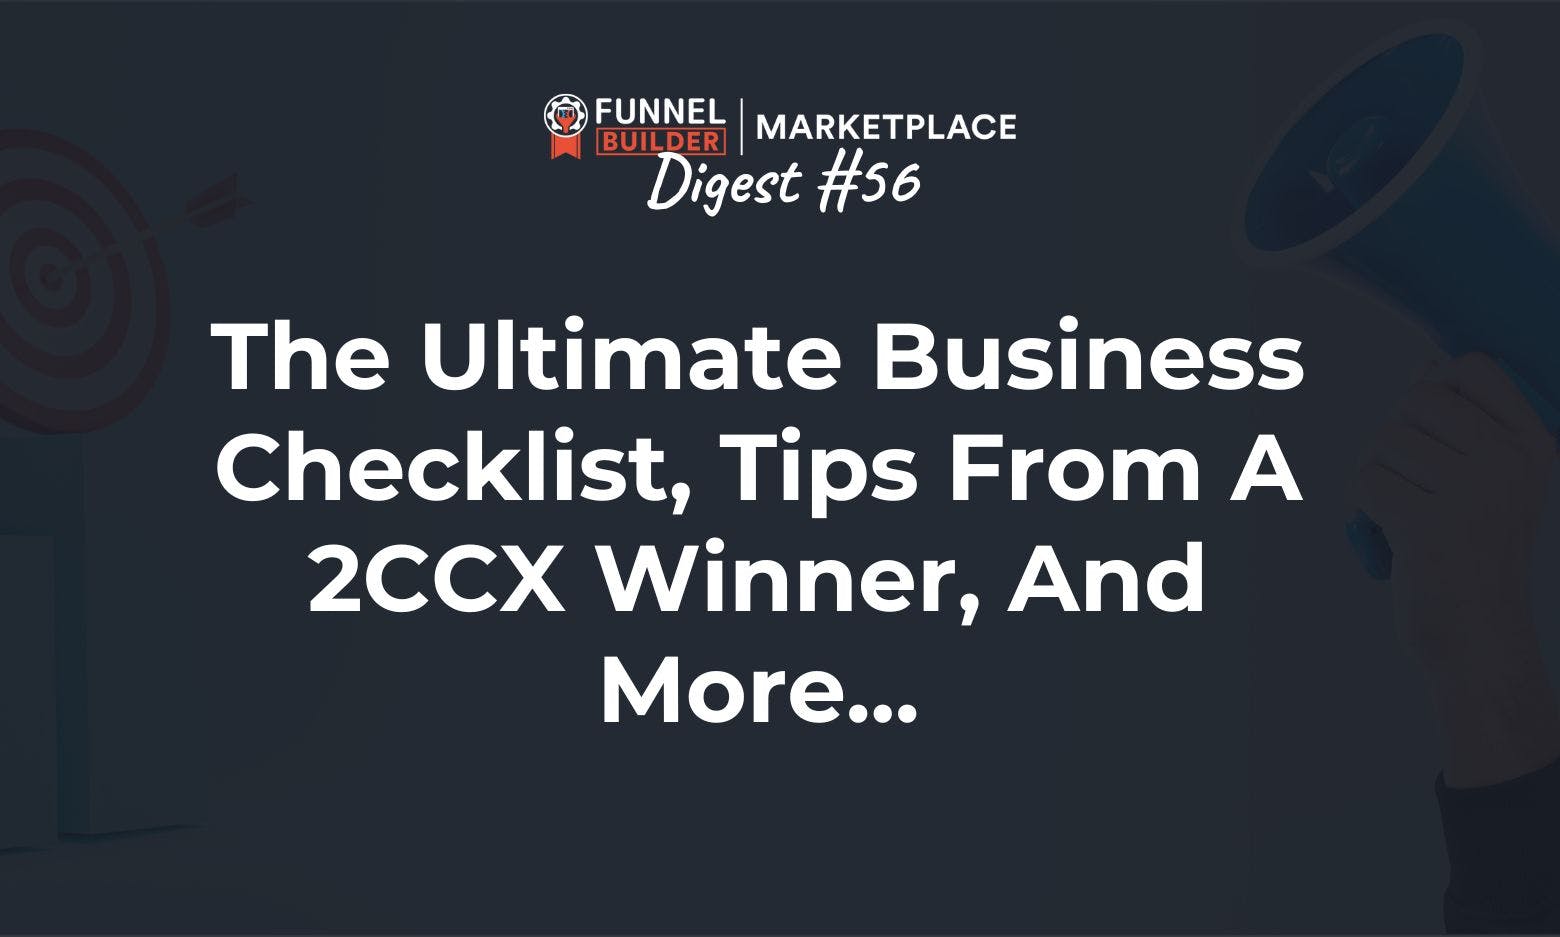 FBM Digest #56: An ultimate business checklist, tips from a 2CCX winner, and more...